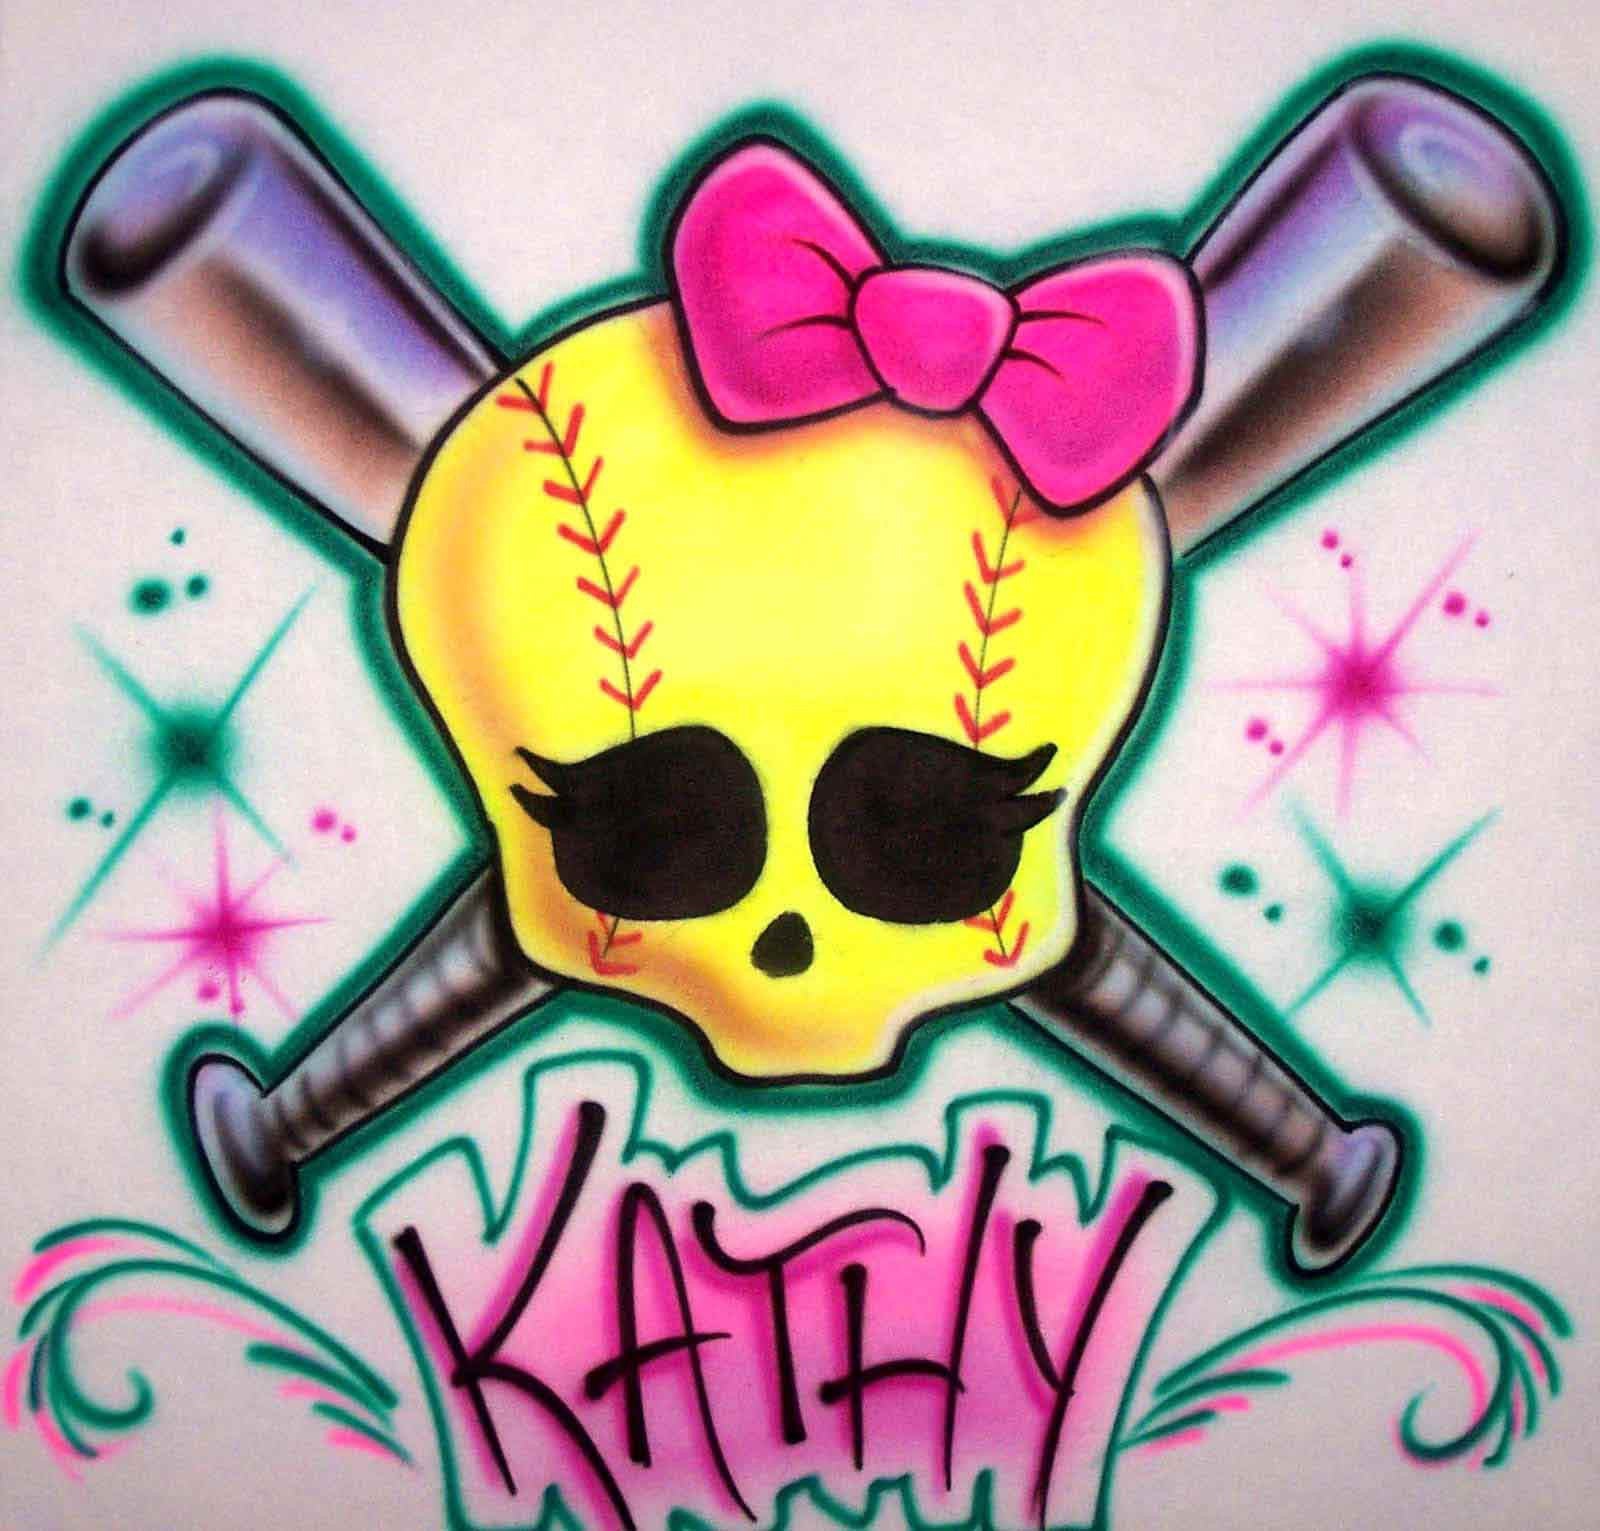 Cute Softball Drawing Fan art is a great way to show your